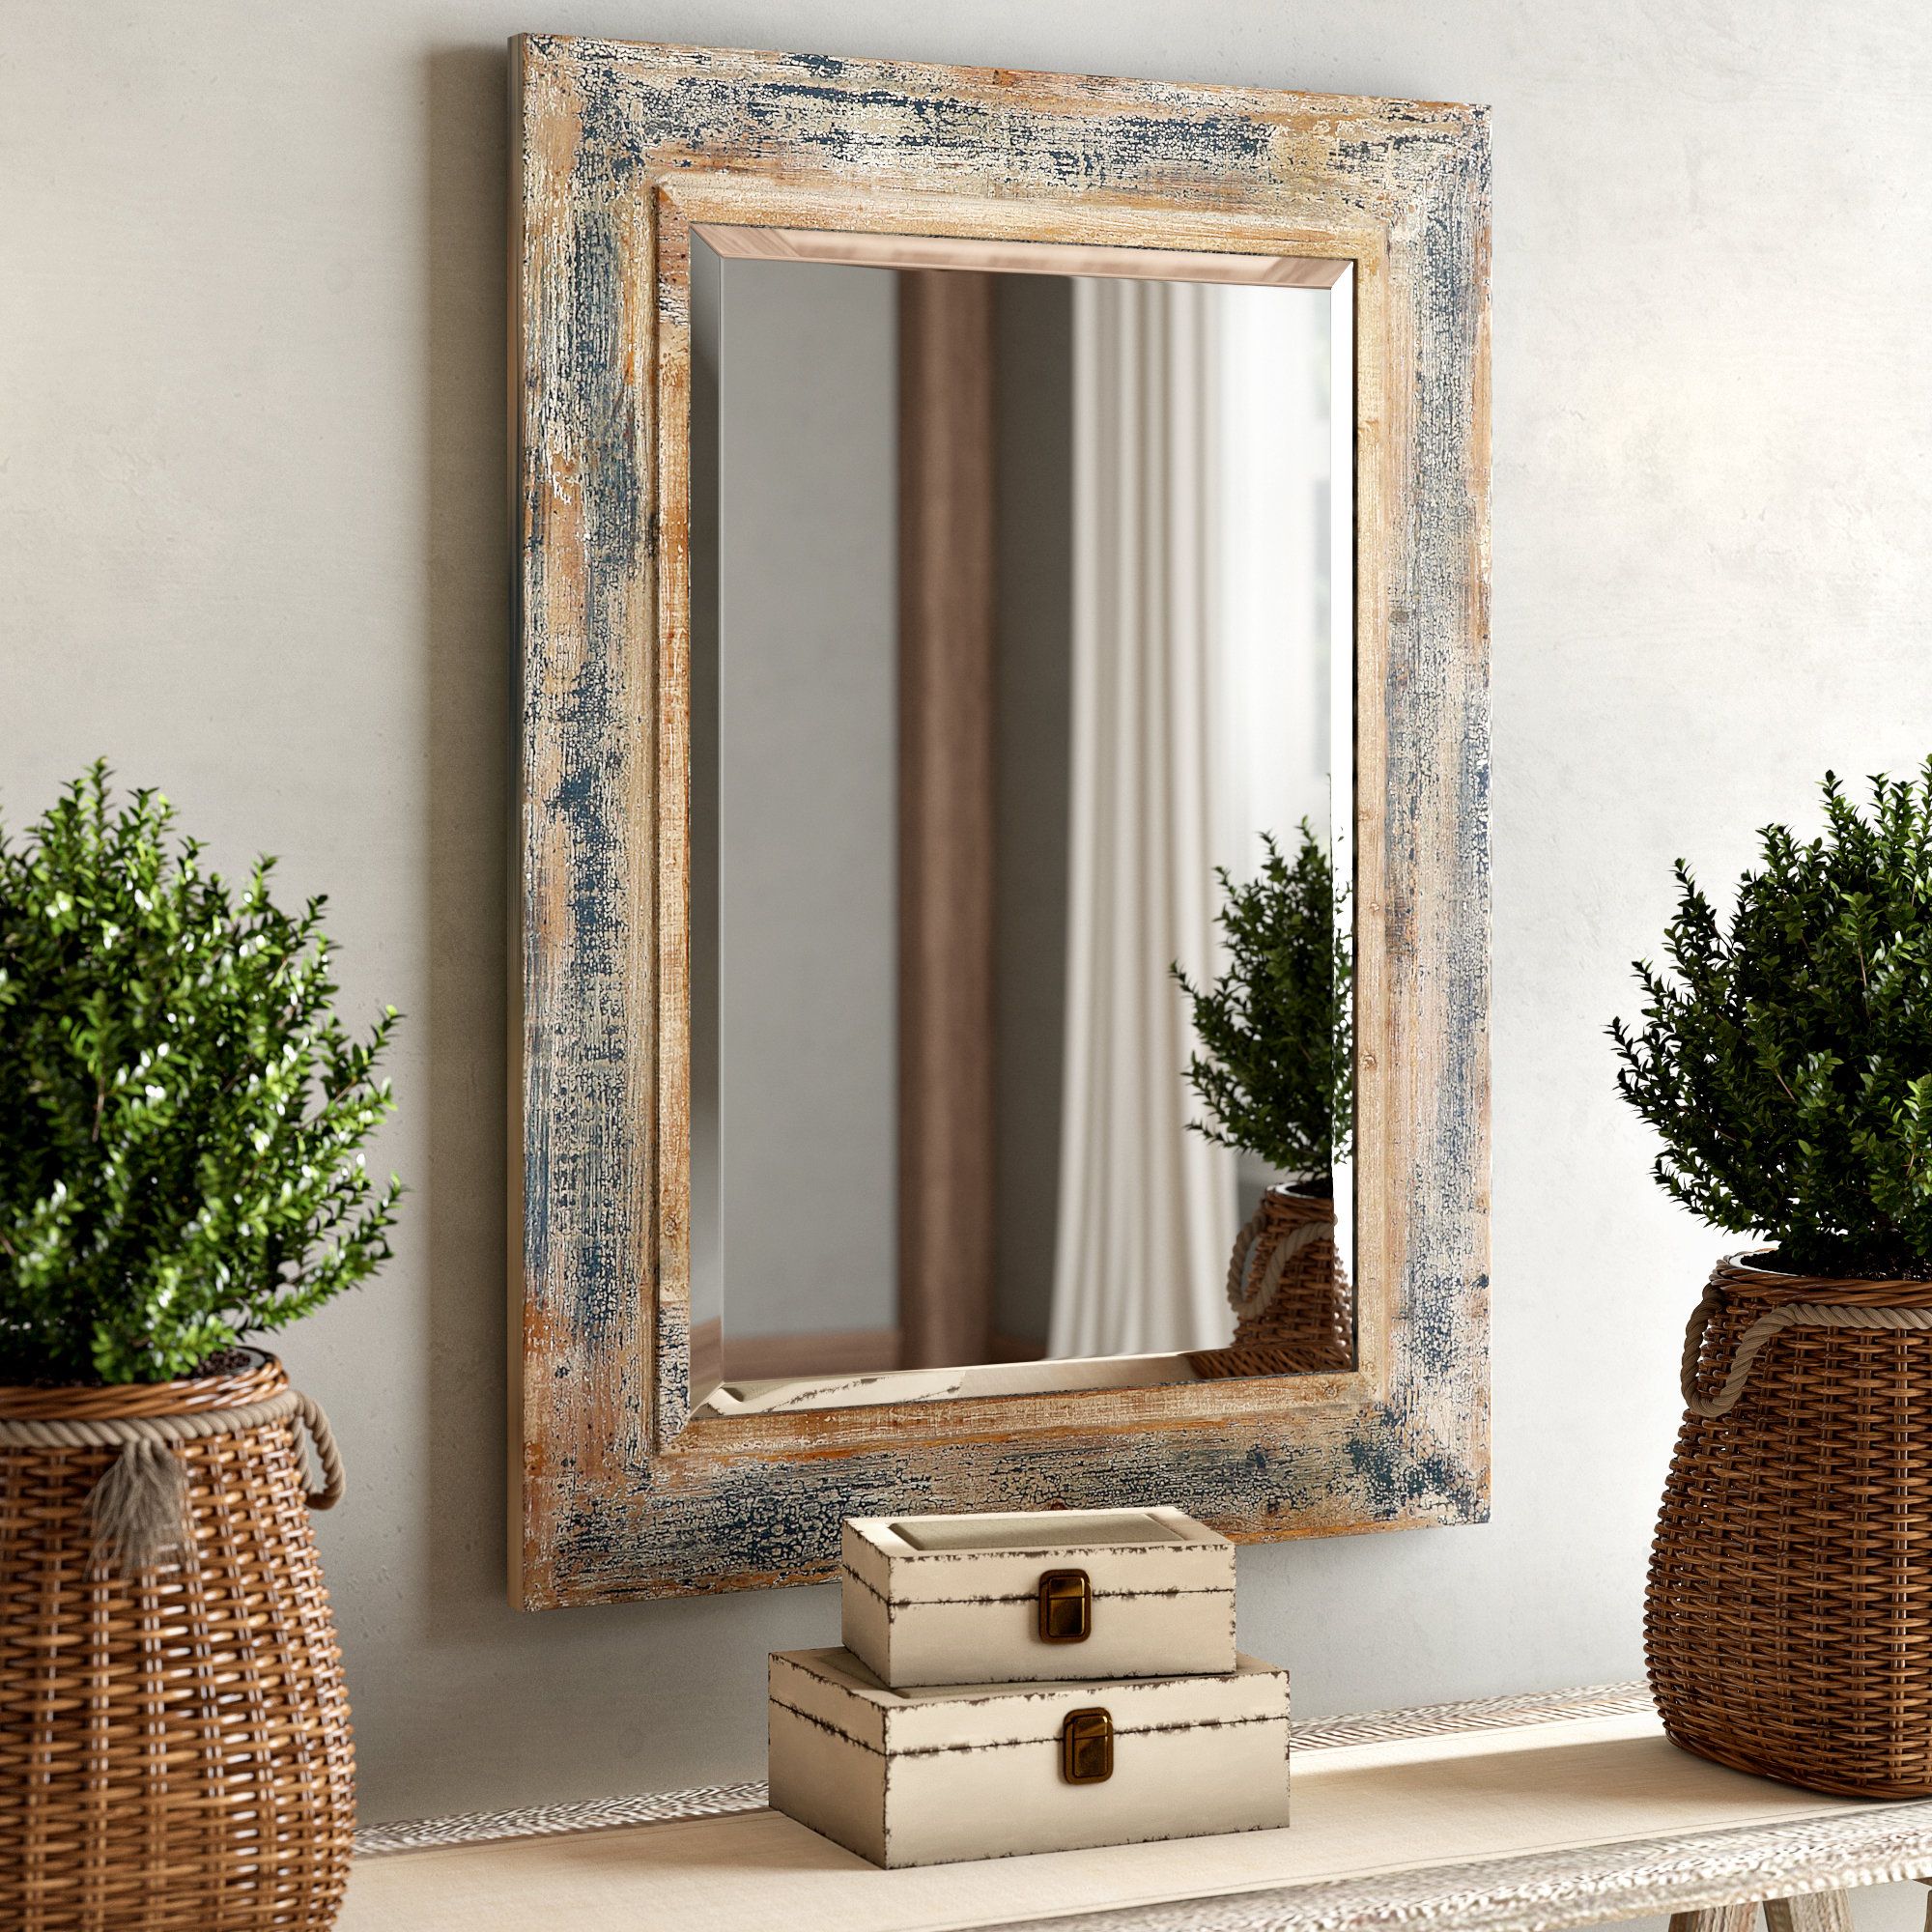 Navy Blue Mirror | Wayfair With Regard To Saylor Wall Mirrors (View 17 of 20)